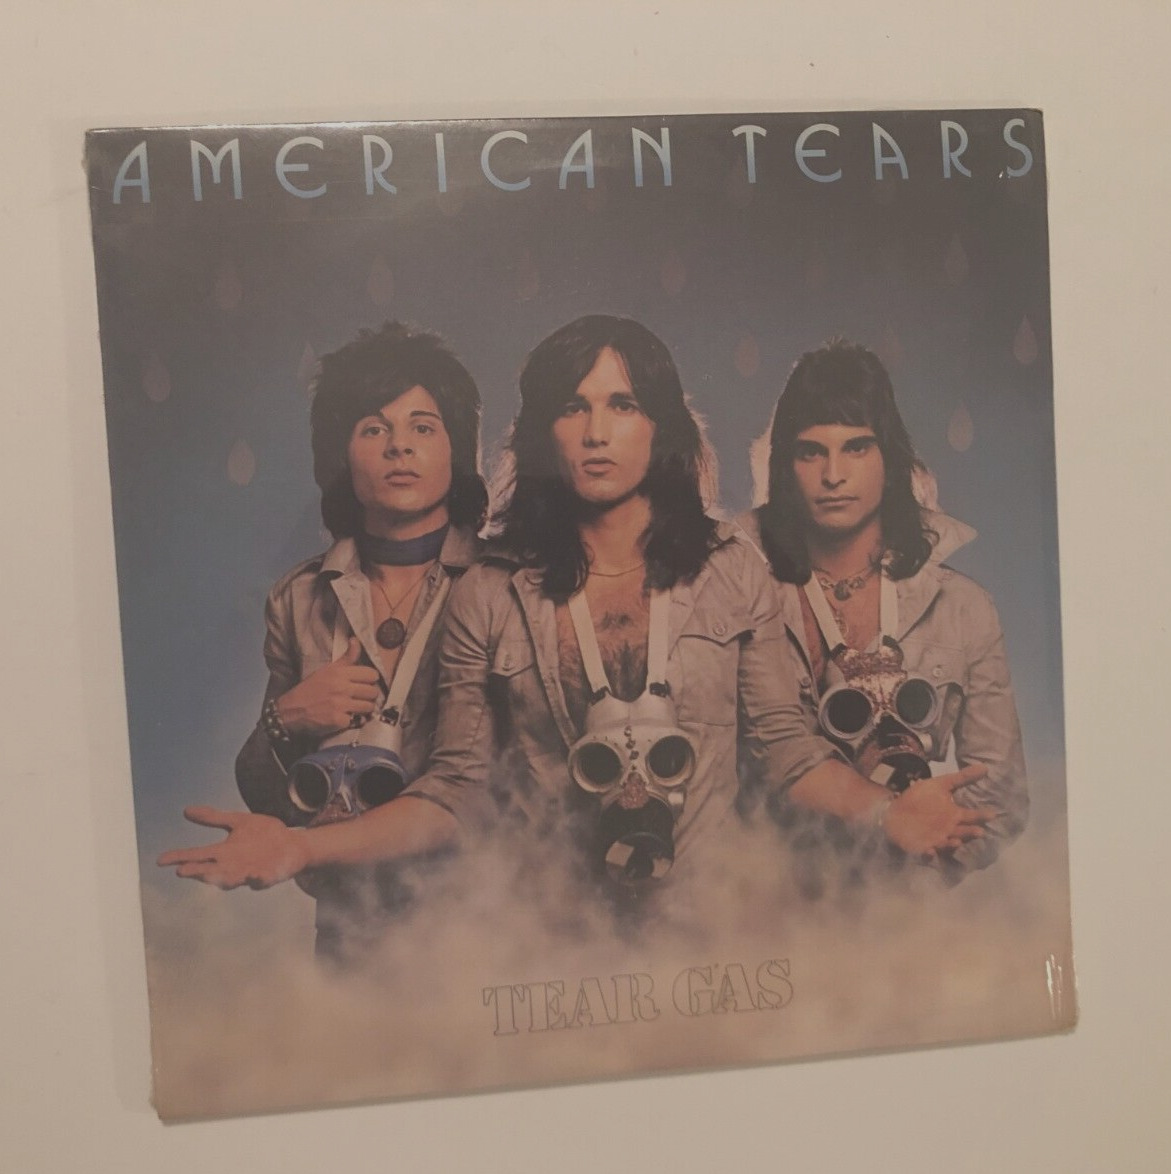 AMERICAN TEARS Tear Gas Columbia PC 33847  LP Record 1975 CBS Vintage New Sealed